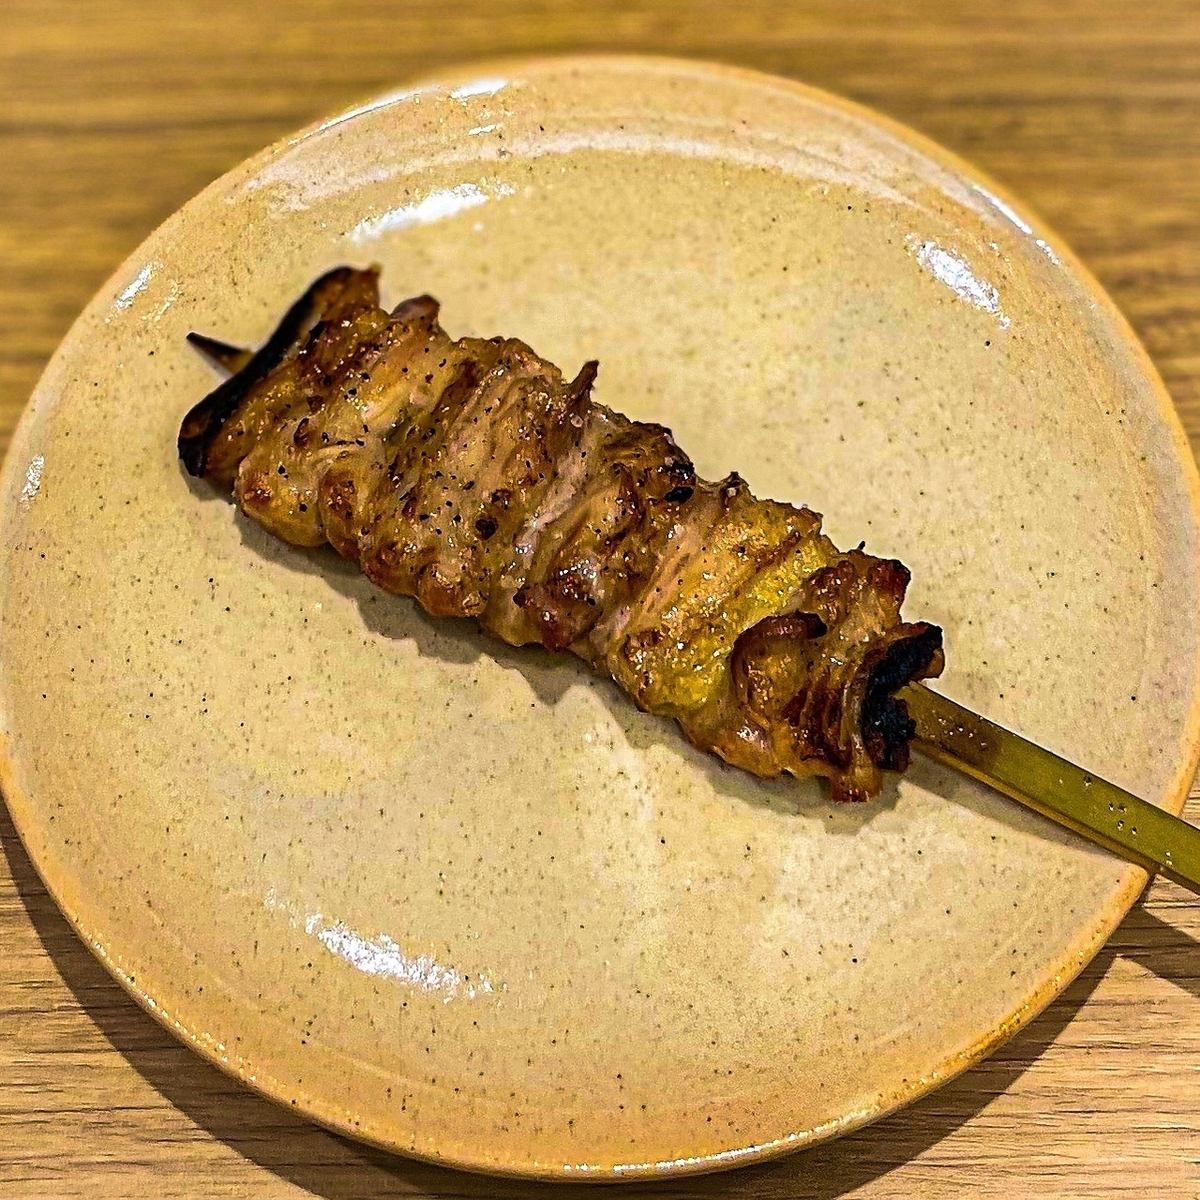 A secret yakitori restaurant that requires reservations.Please enjoy the discerning dish.